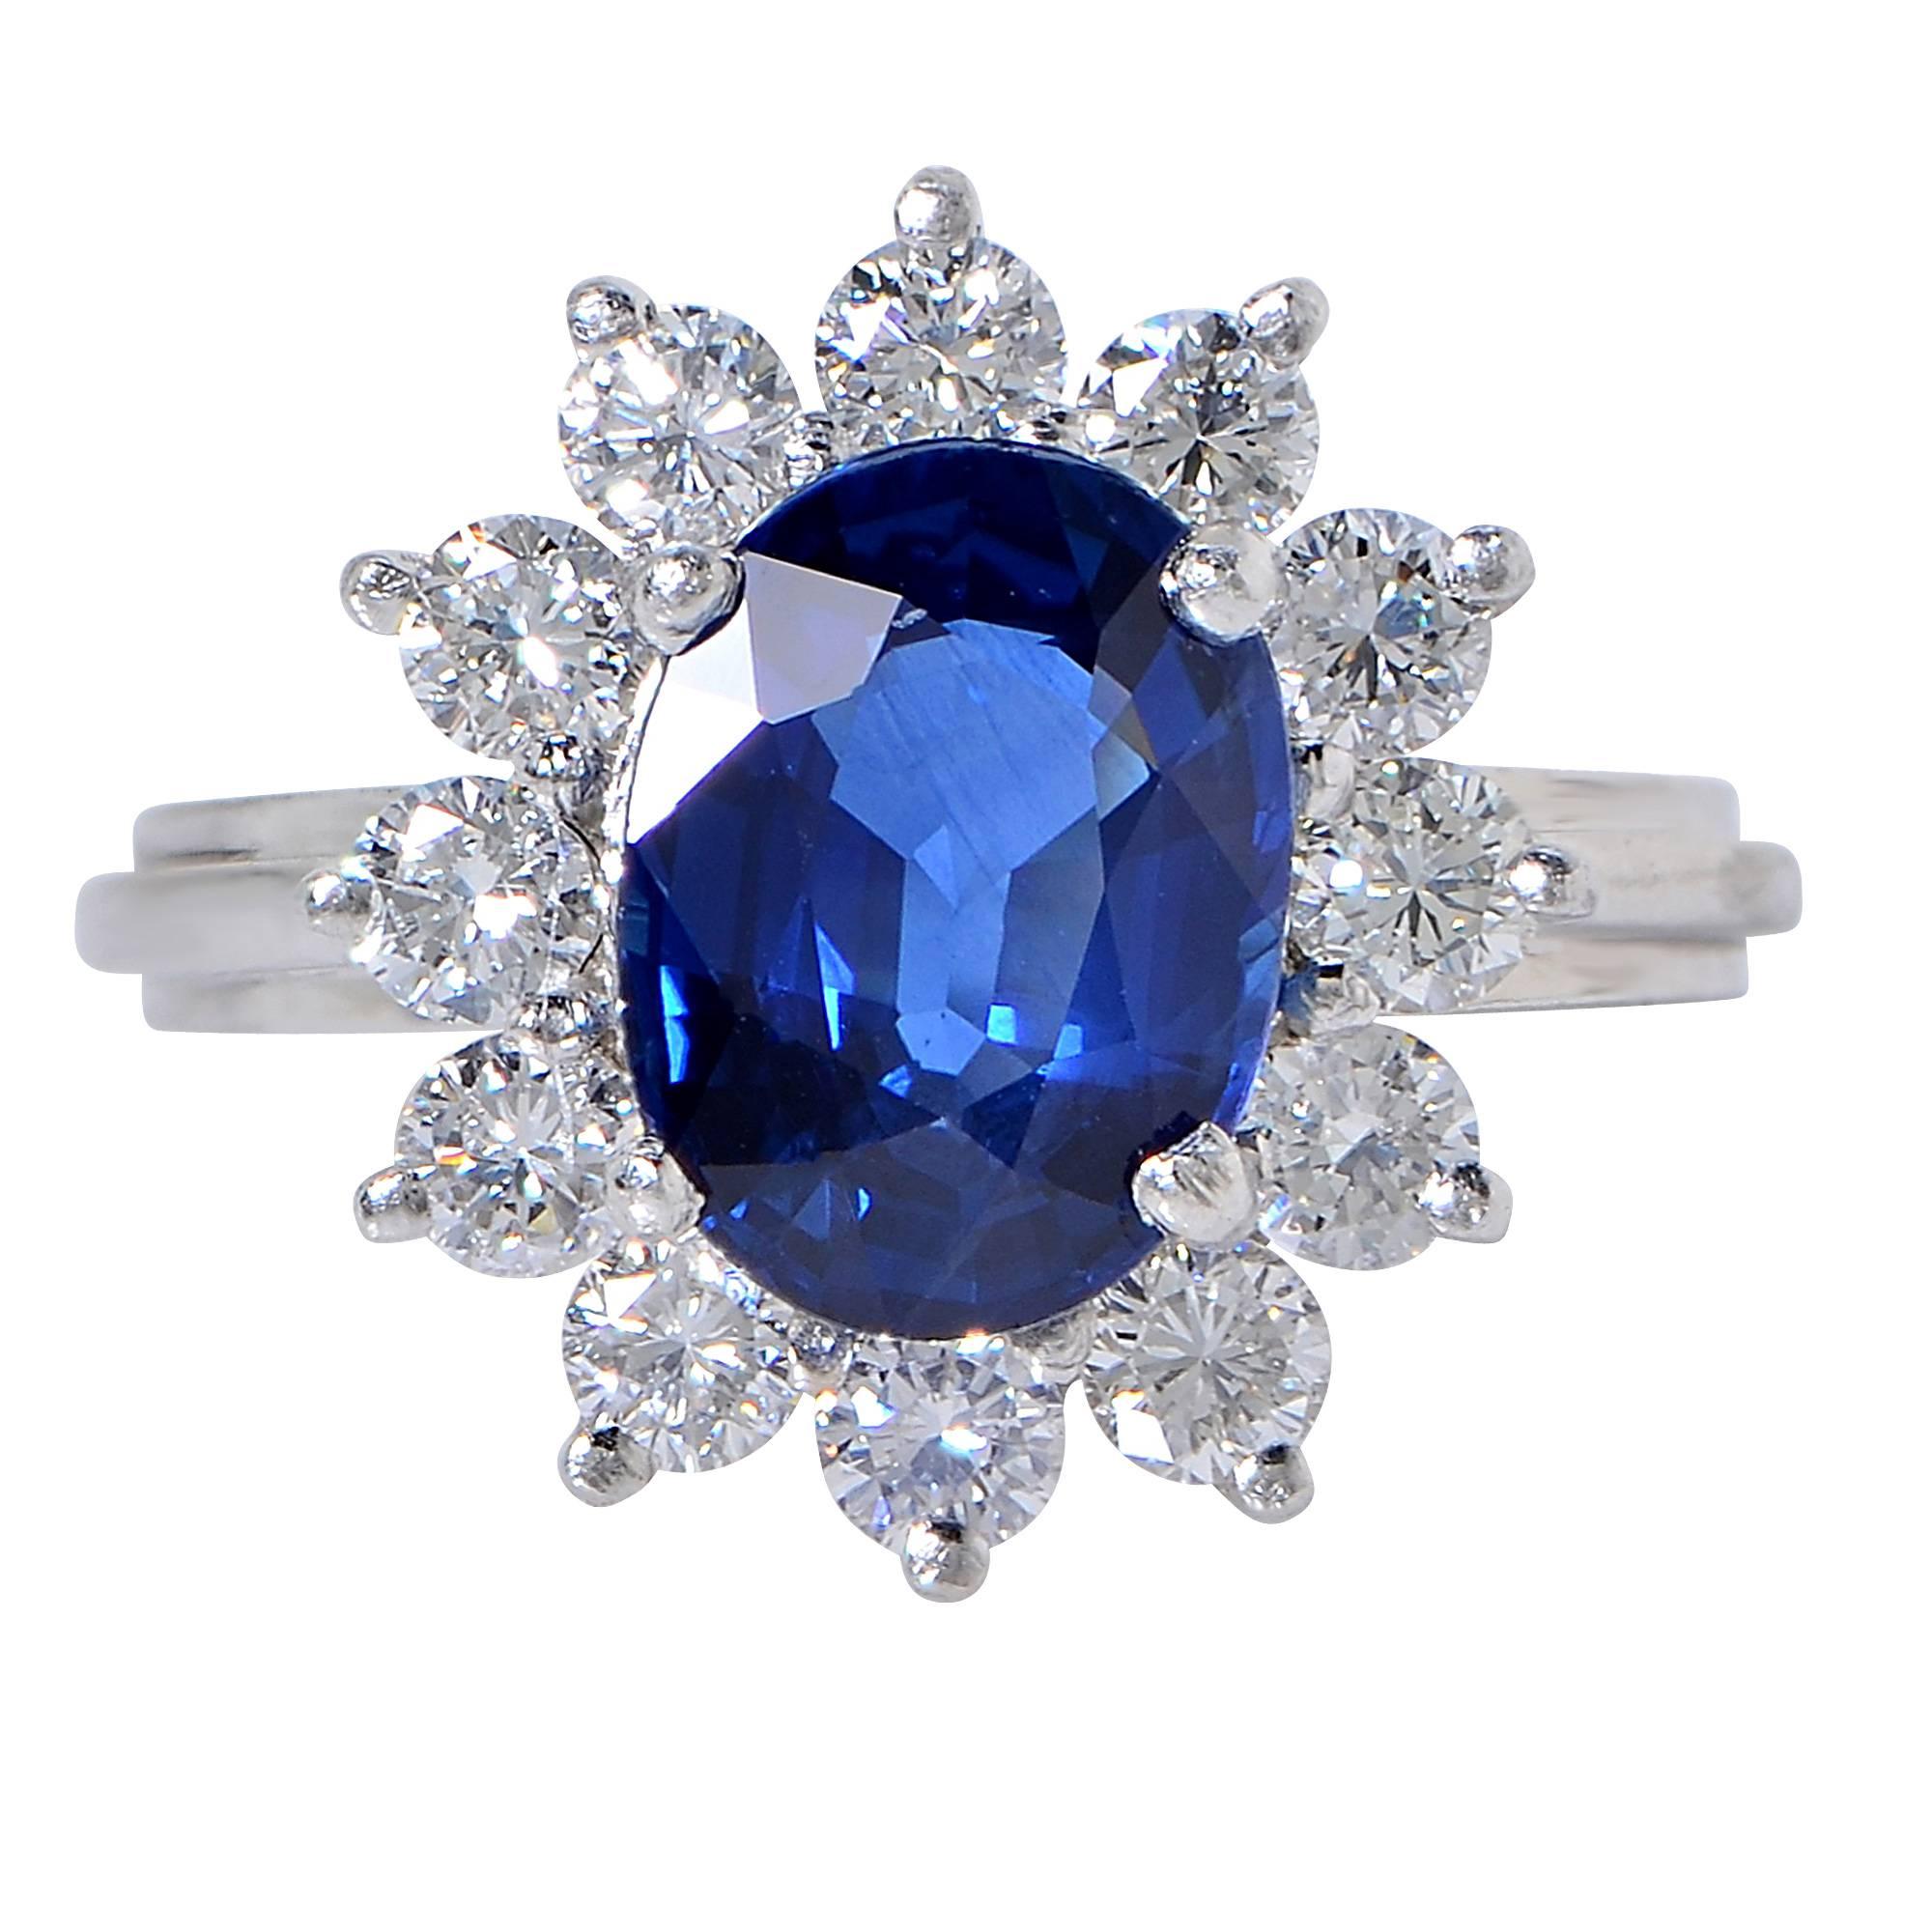 Platinum ring containing a 3.26ct blue sapphire surrounded by 12 round brilliant cut diamonds weighing approximately 1.20cts, F color, VS clarity.

The ring is a size 7 and can be sized up or down.
It is stamped and/or tested as platinum.
The metal